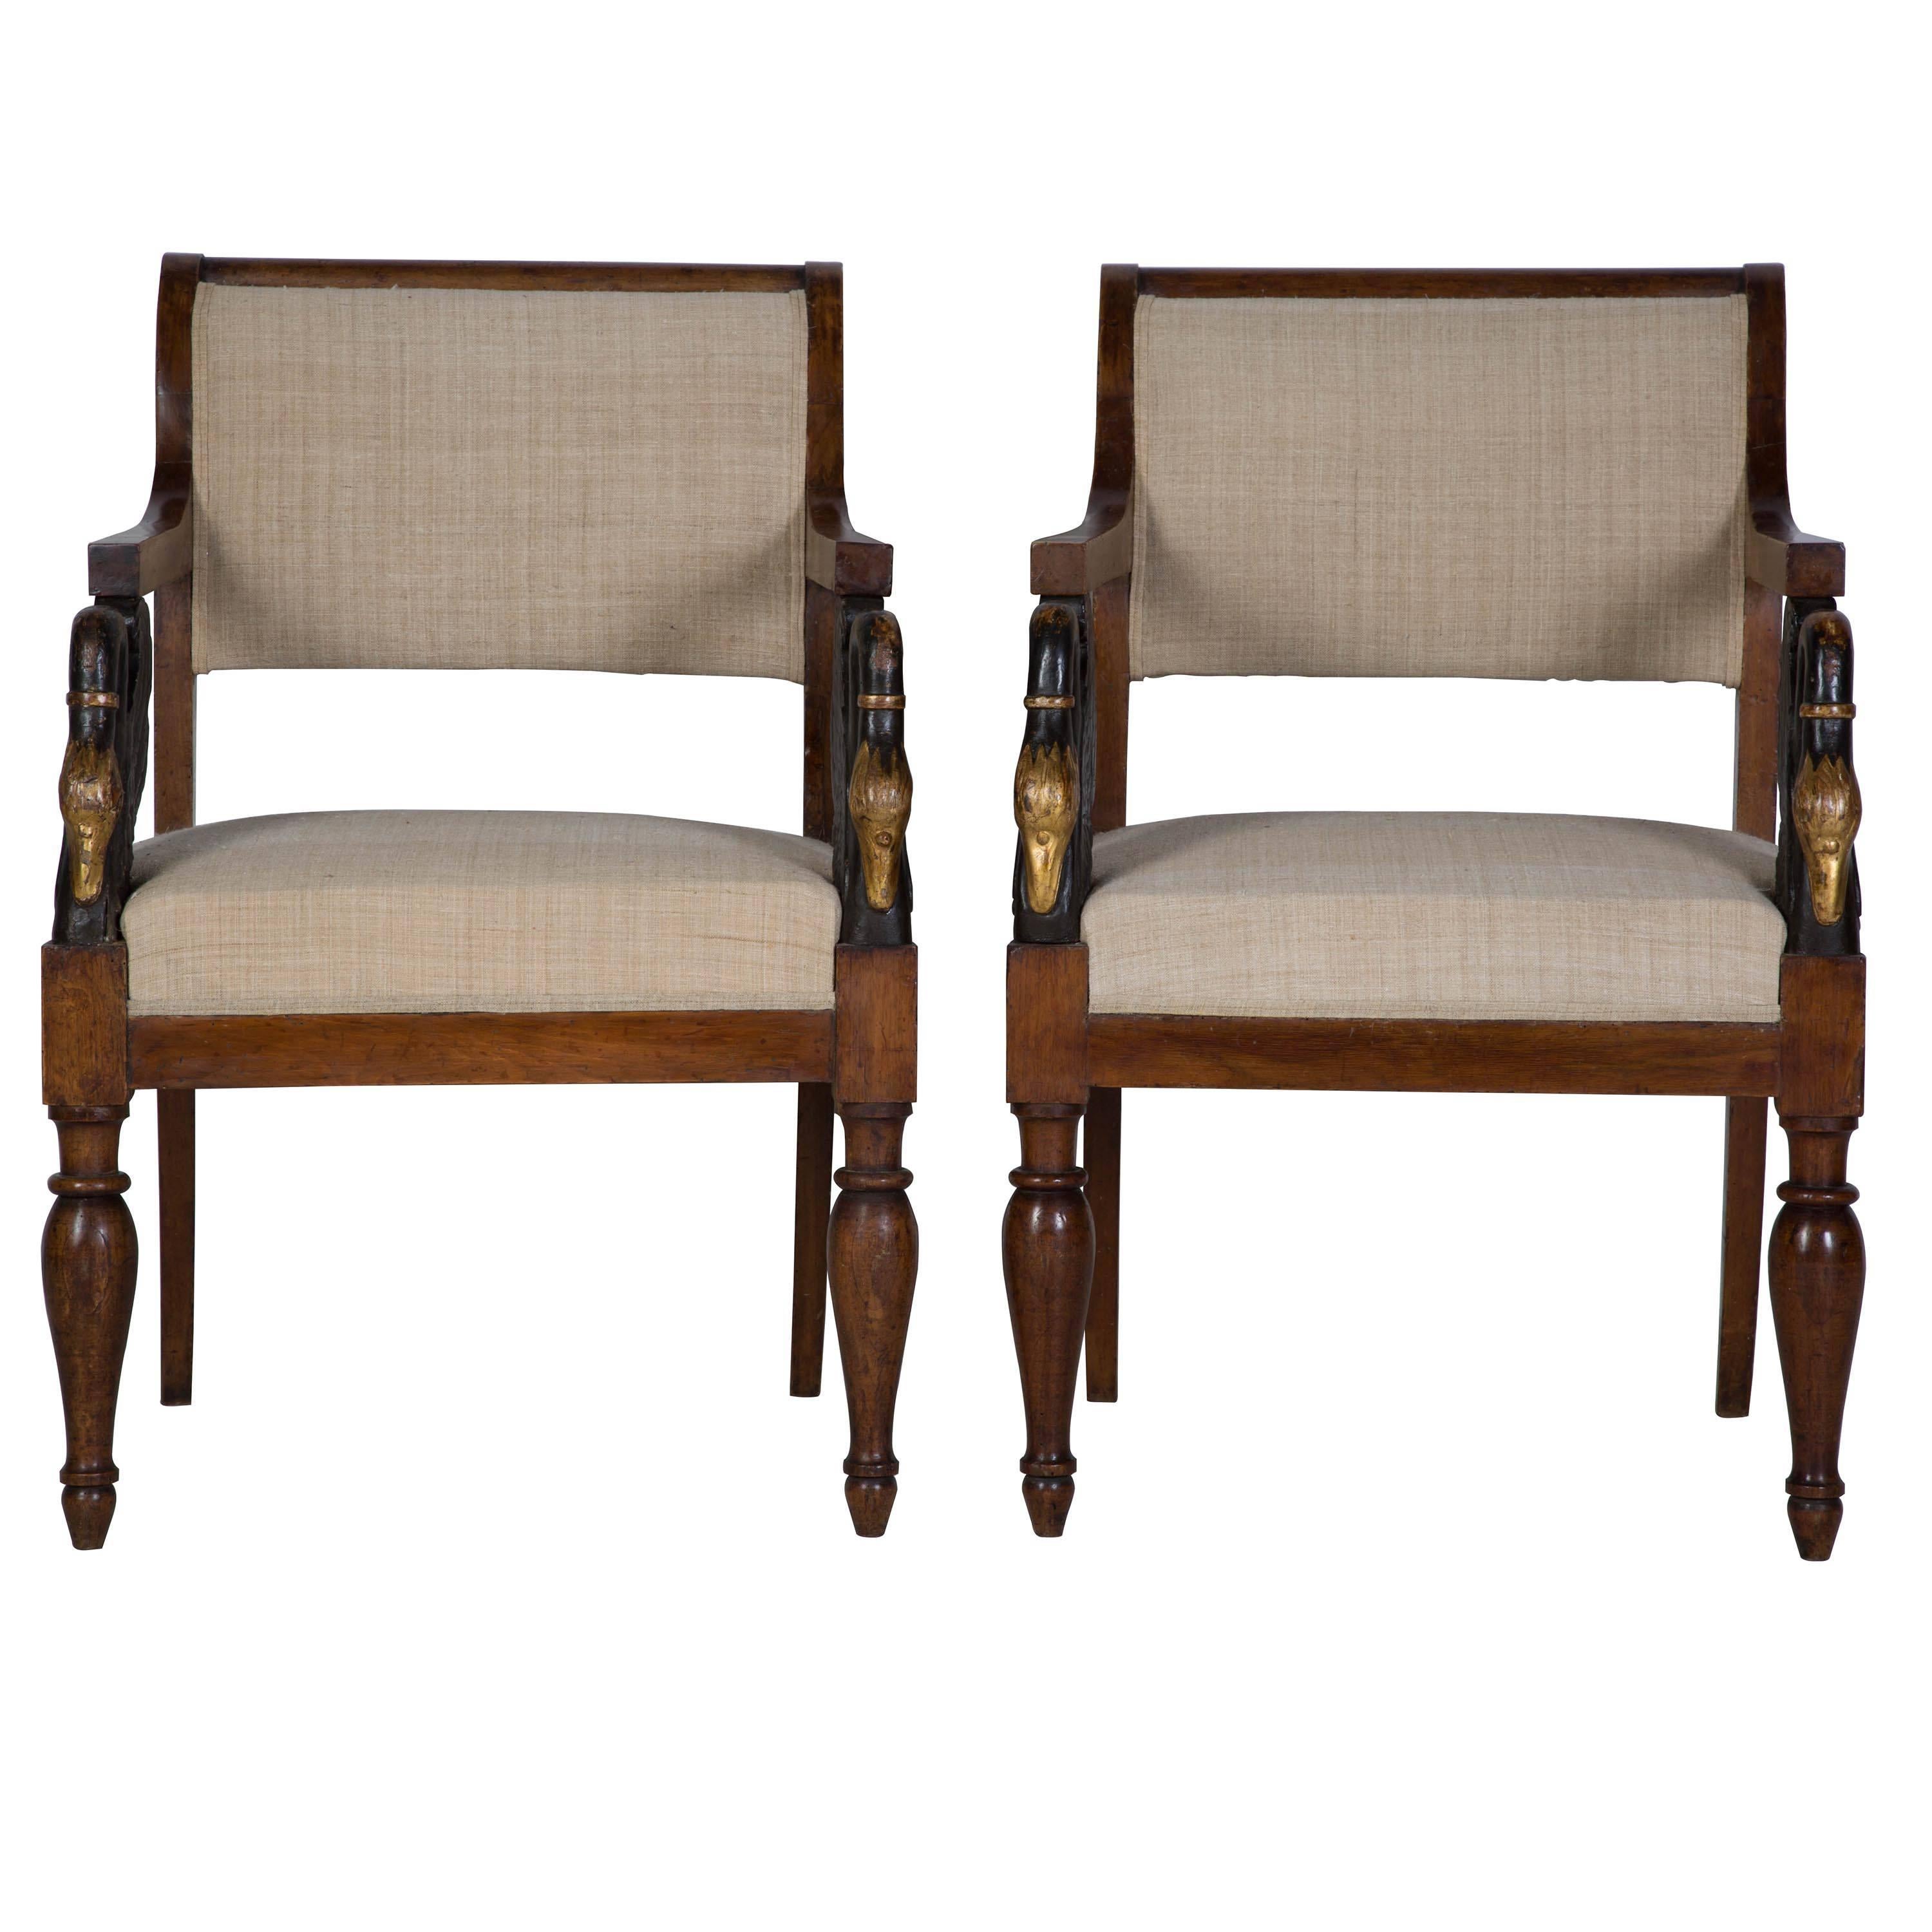 Pair of Early 19th Century Italian Chairs